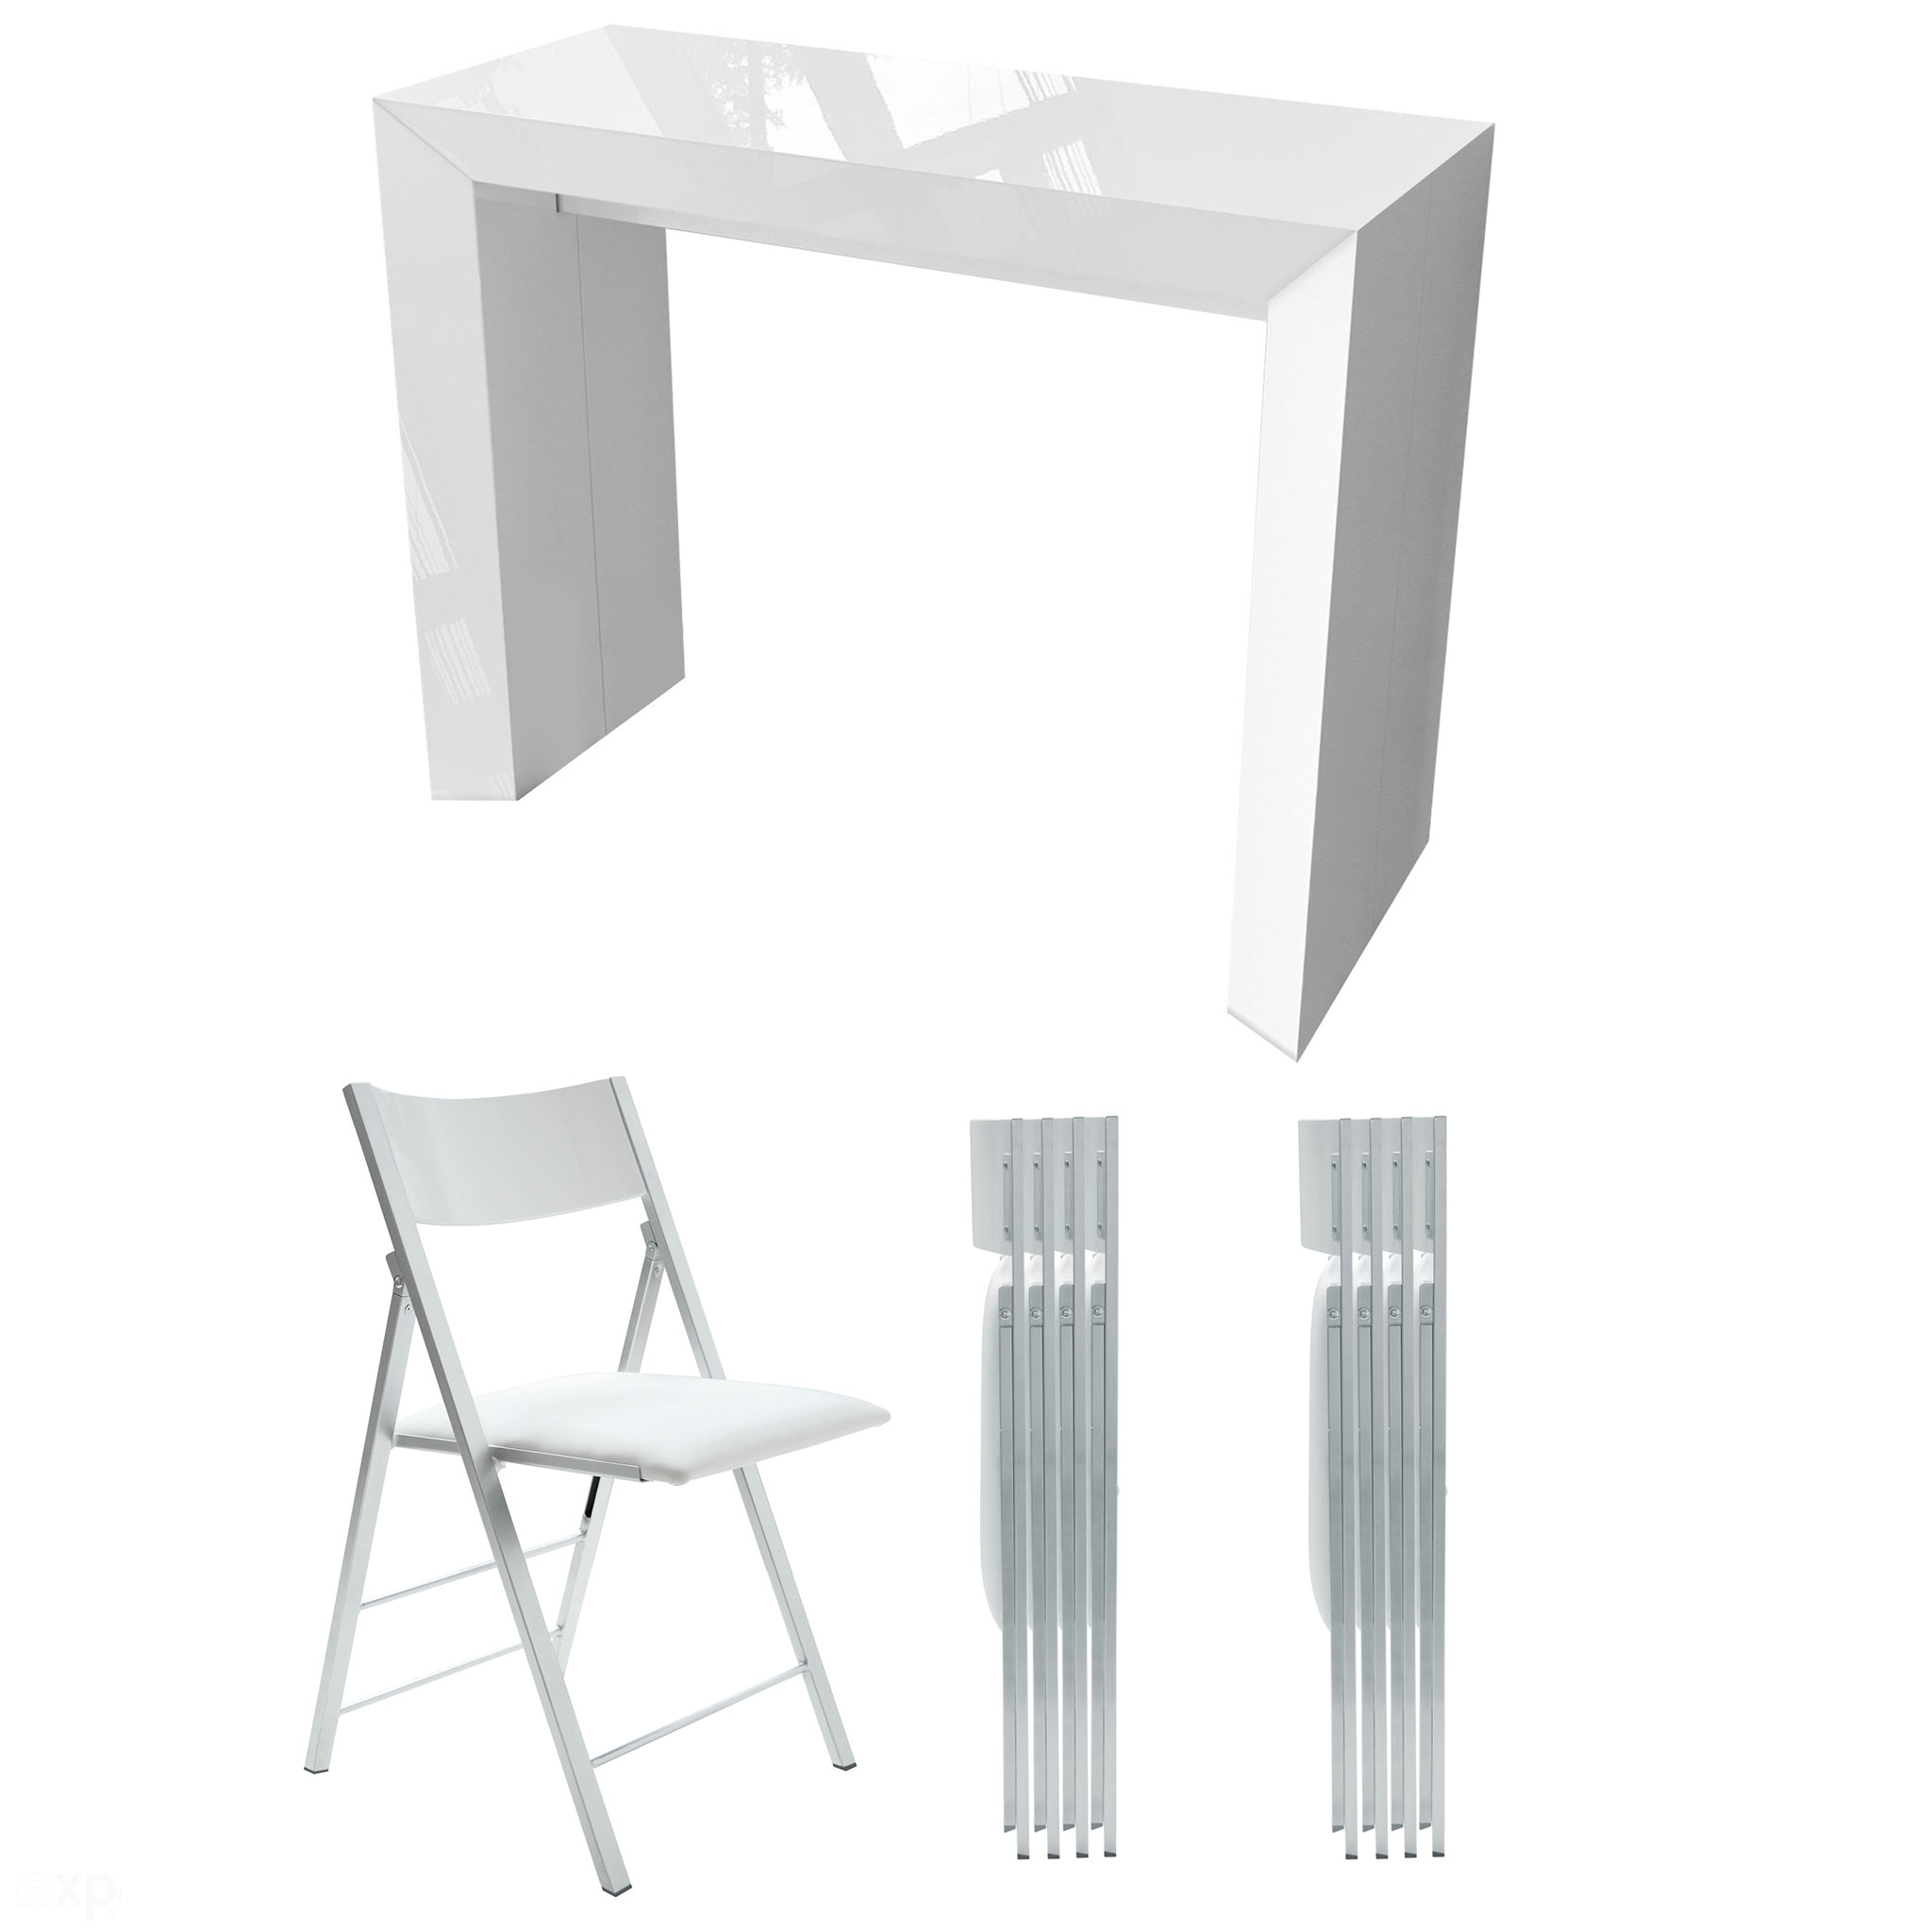 Jr Edge Dining Set Super Extending Console Table Chairs Expand Furniture Folding Tables Smarter Wall Beds Space Savers